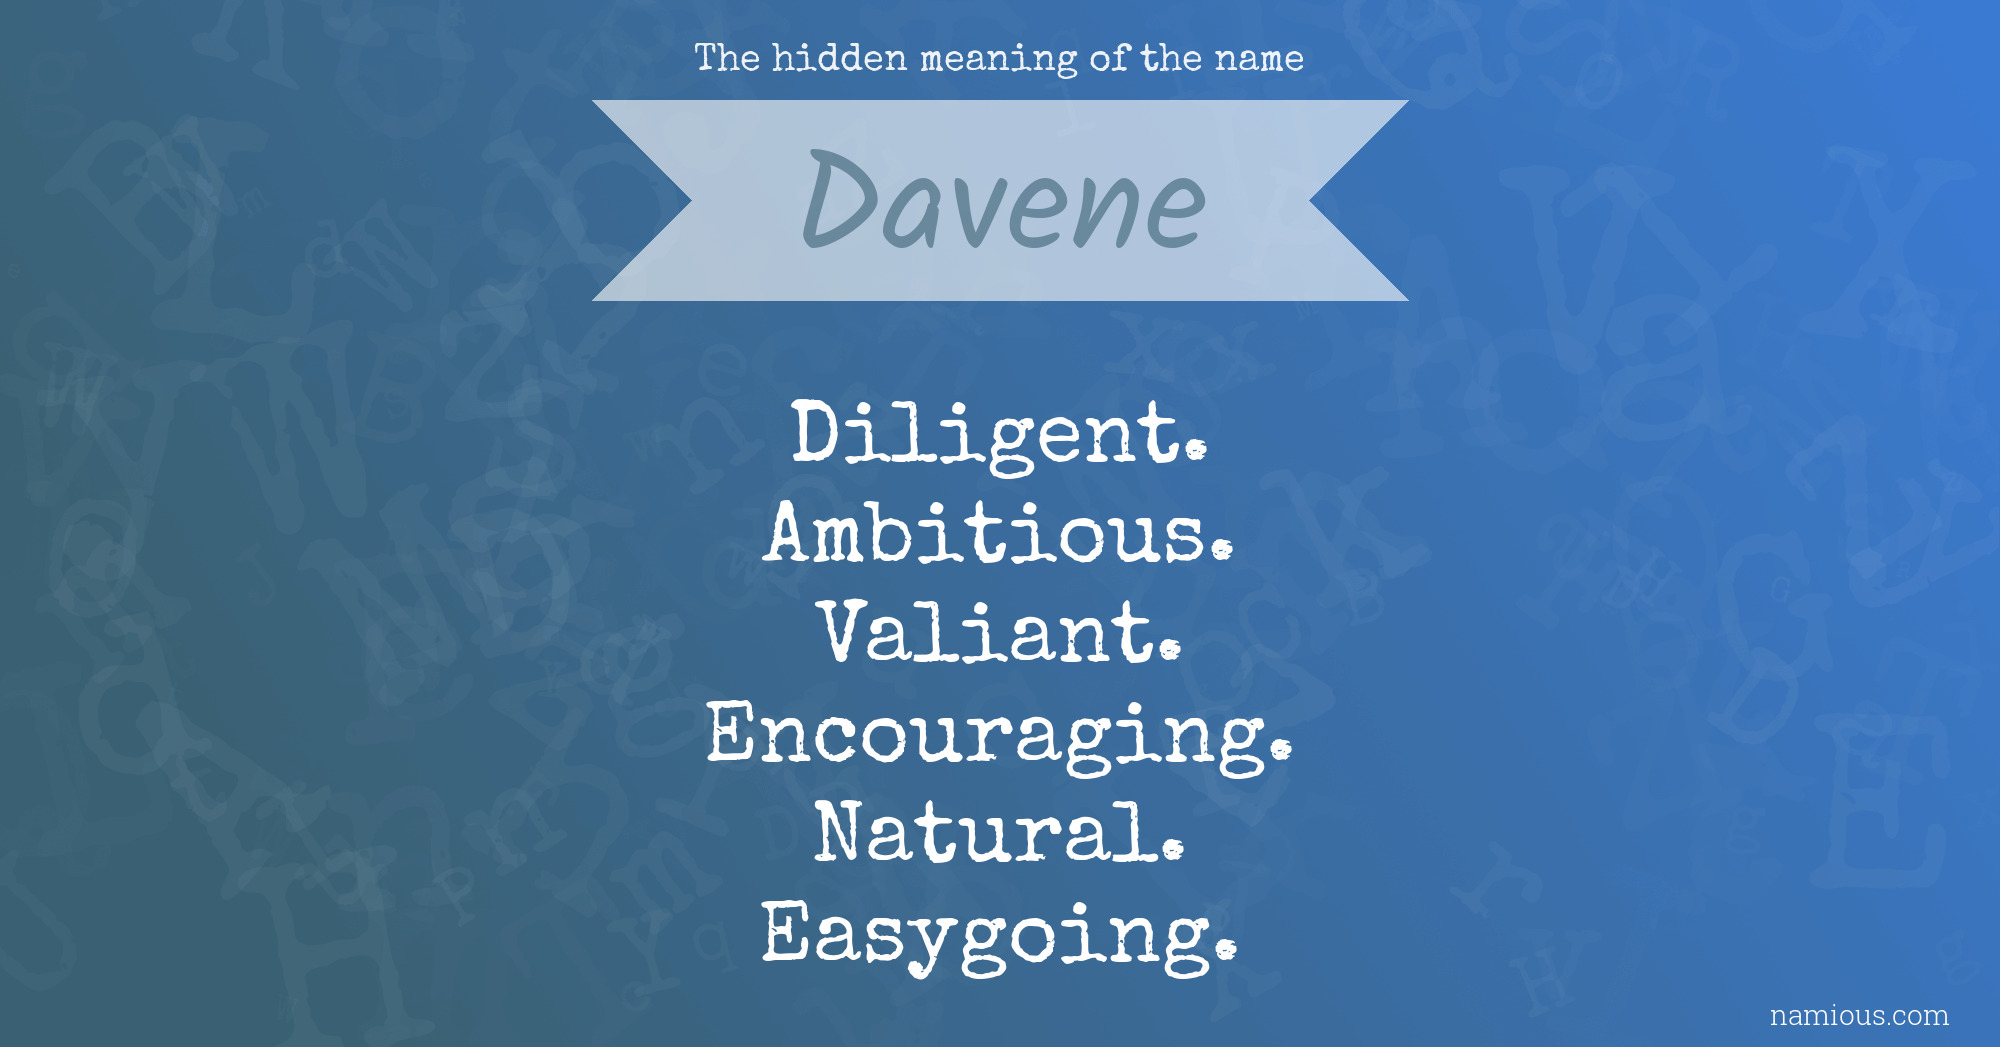 The hidden meaning of the name Davene